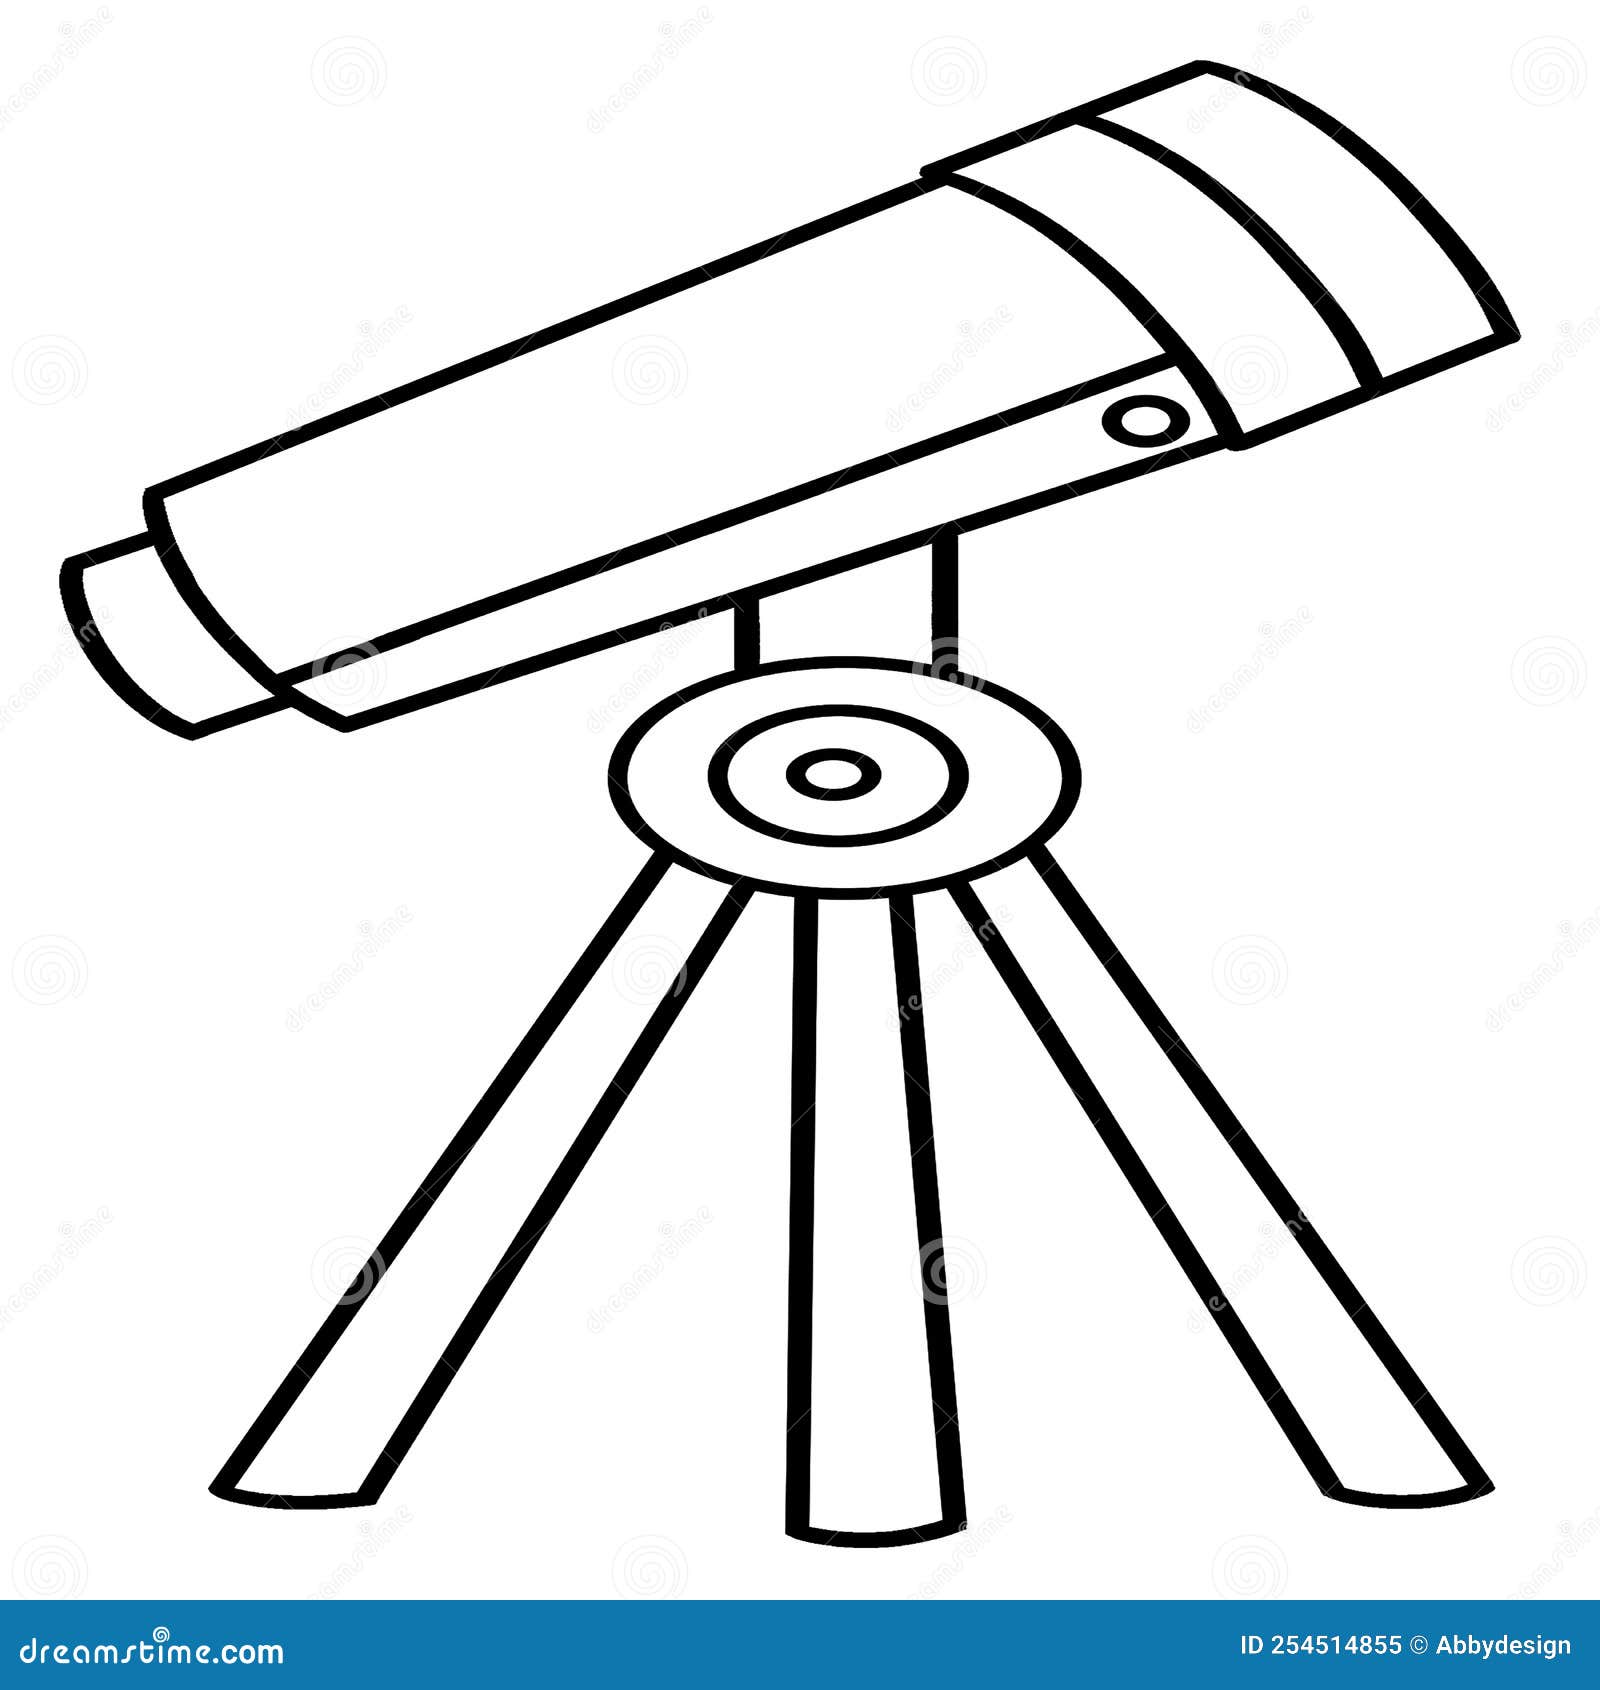 Telescope isolated coloring page for kids stock vector